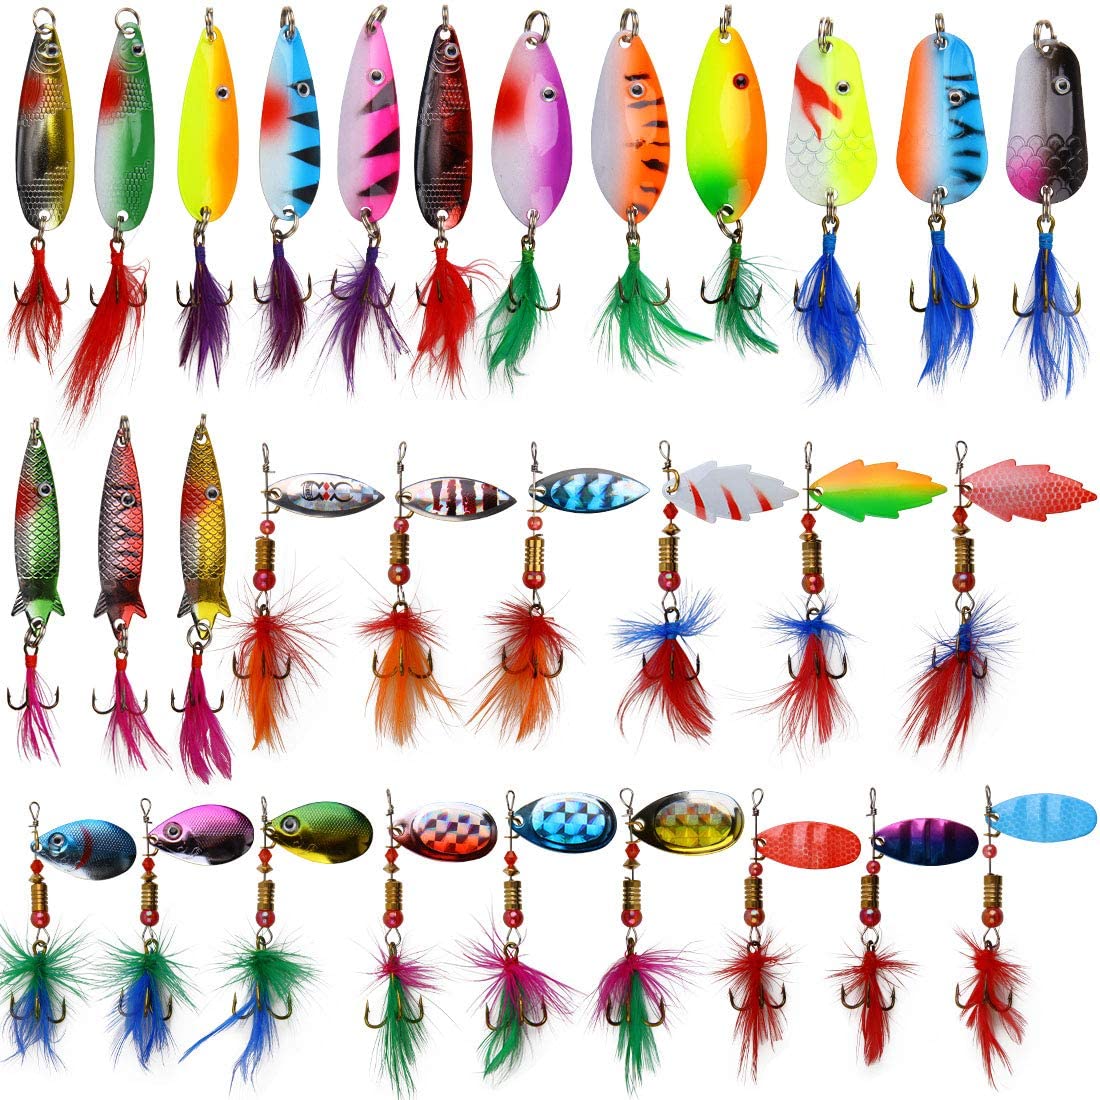 Wholesale 30Pcs Fishing Lures,Baits Tackle Spinners Swimbait Crankbaits Topwater Lures,Variety Fishing Baits Rooster Tail Trout Salmon Spoons Walleye Colorful Fishing Gear Lures Kit Set